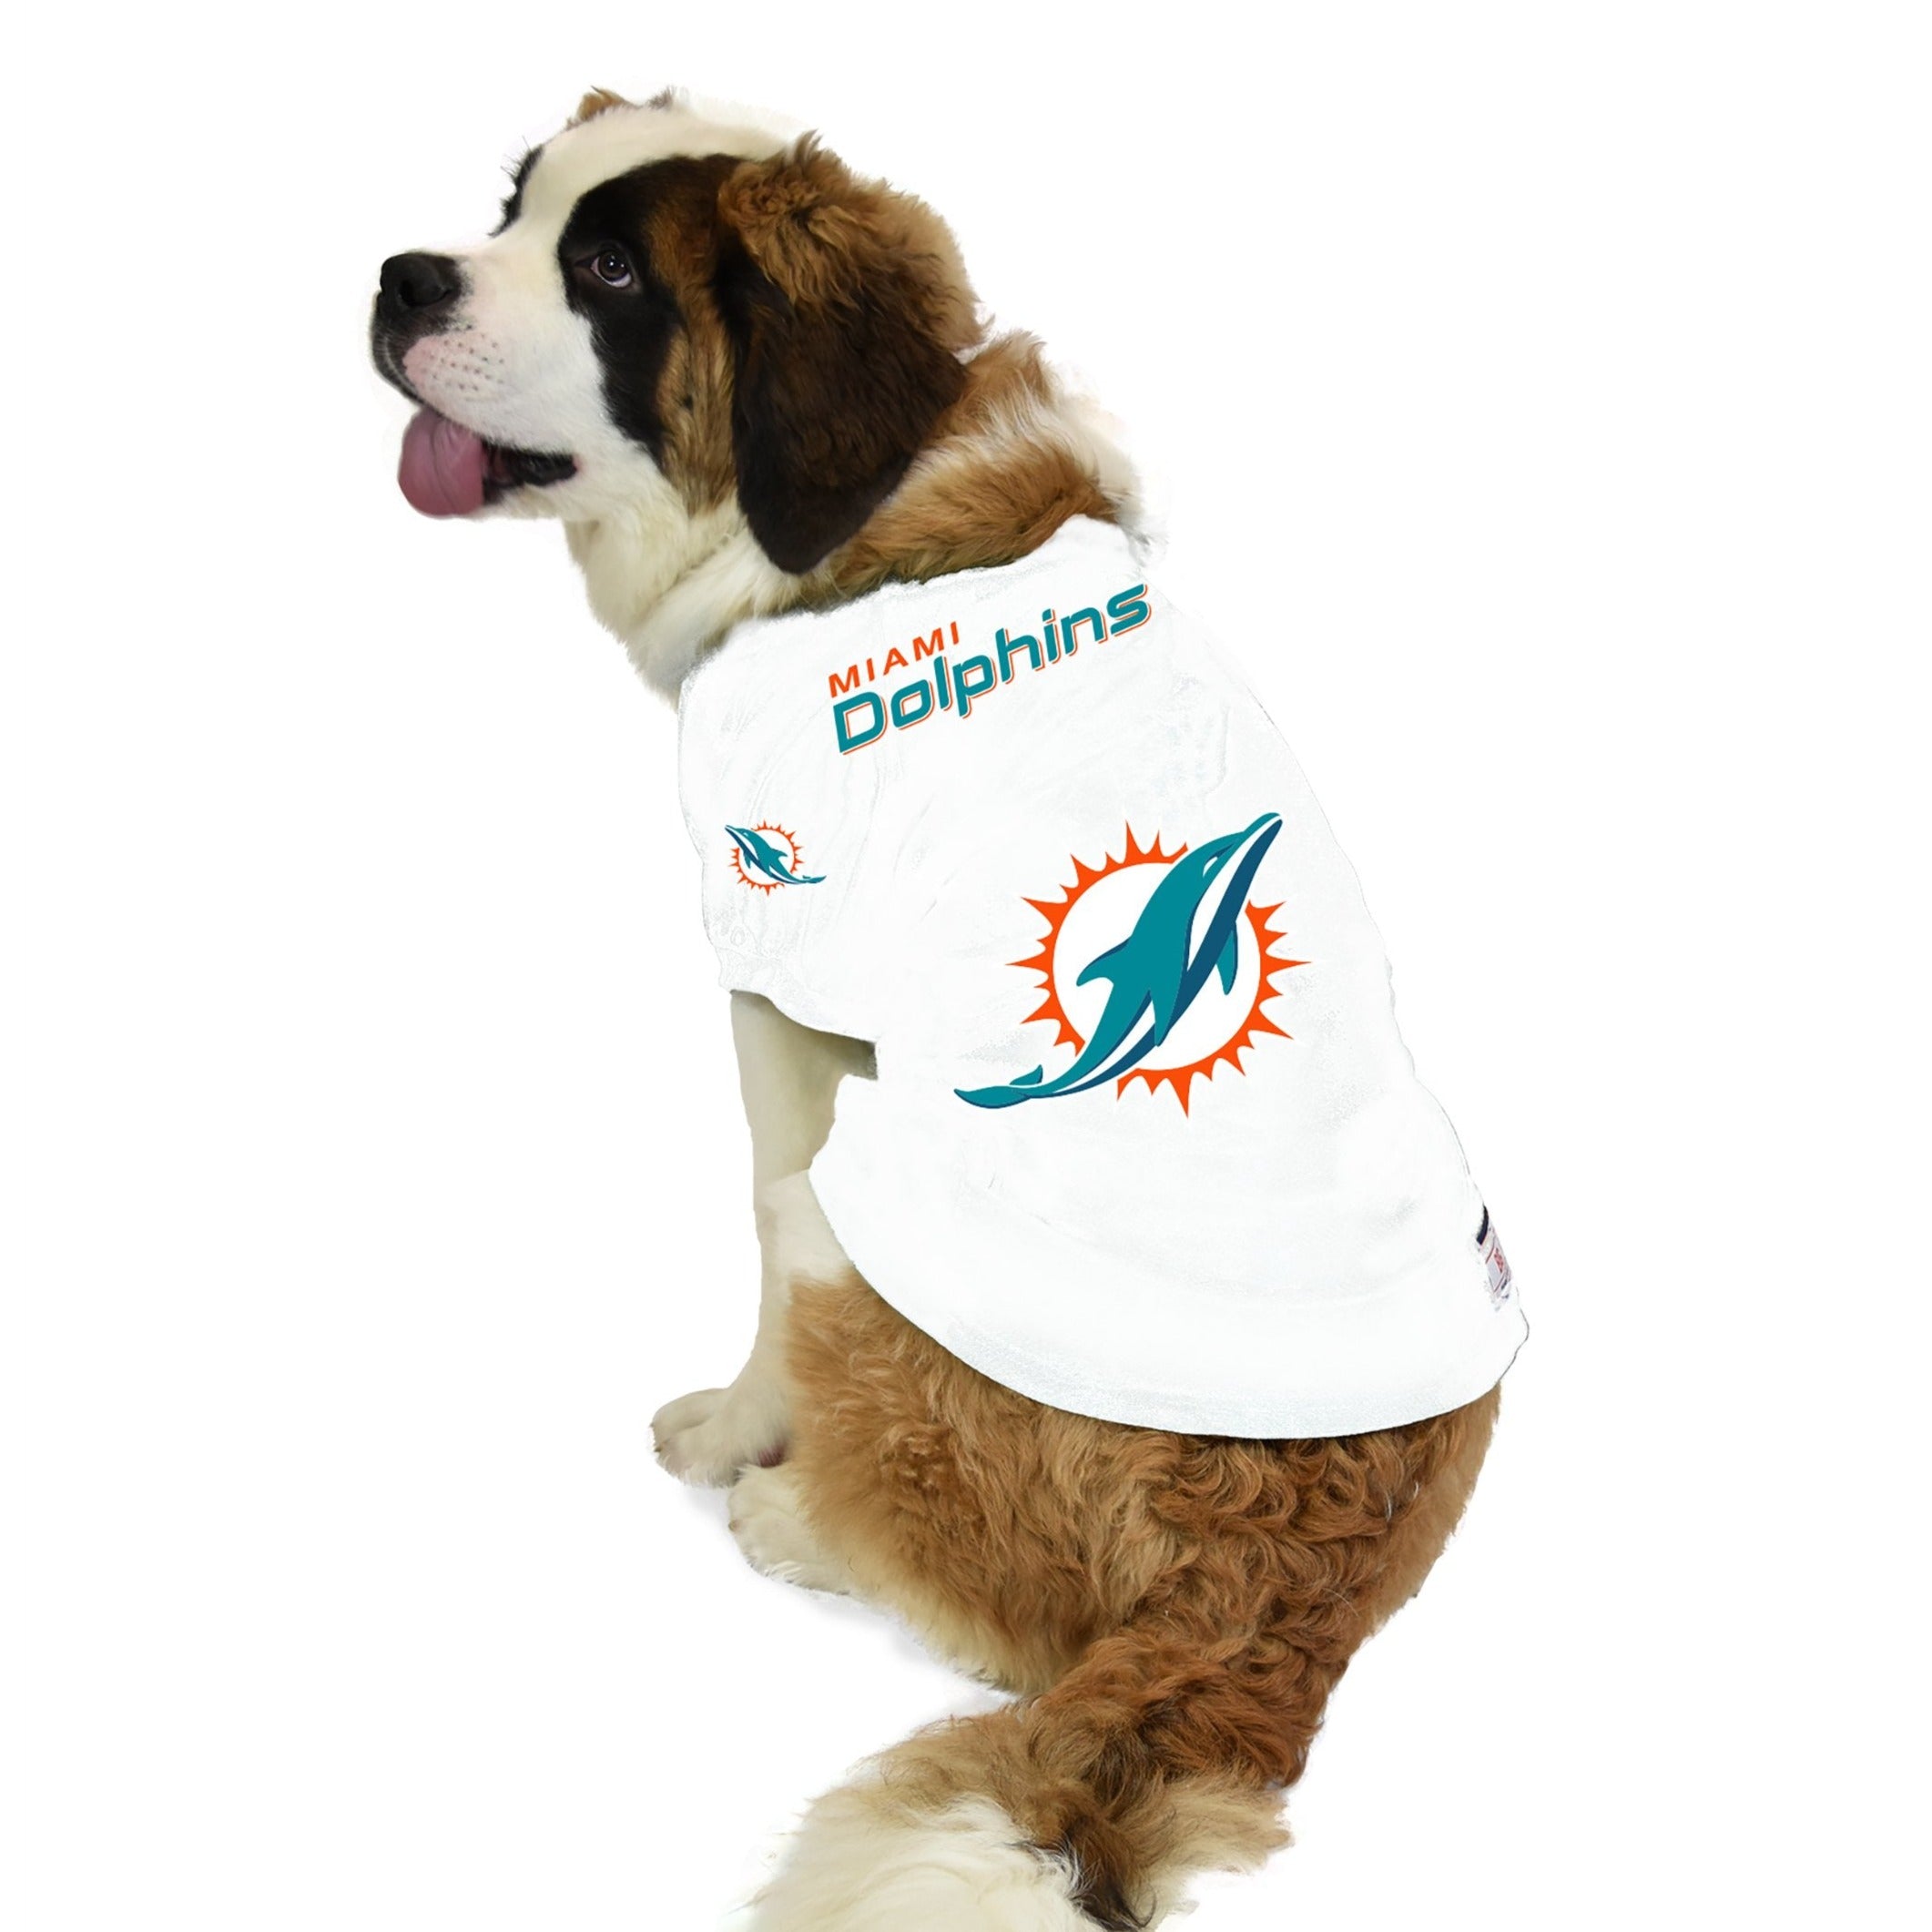 Official Miami Dolphins Gear, Dolphins Jerseys, Store, Dolphins Pro Shop,  Apparel